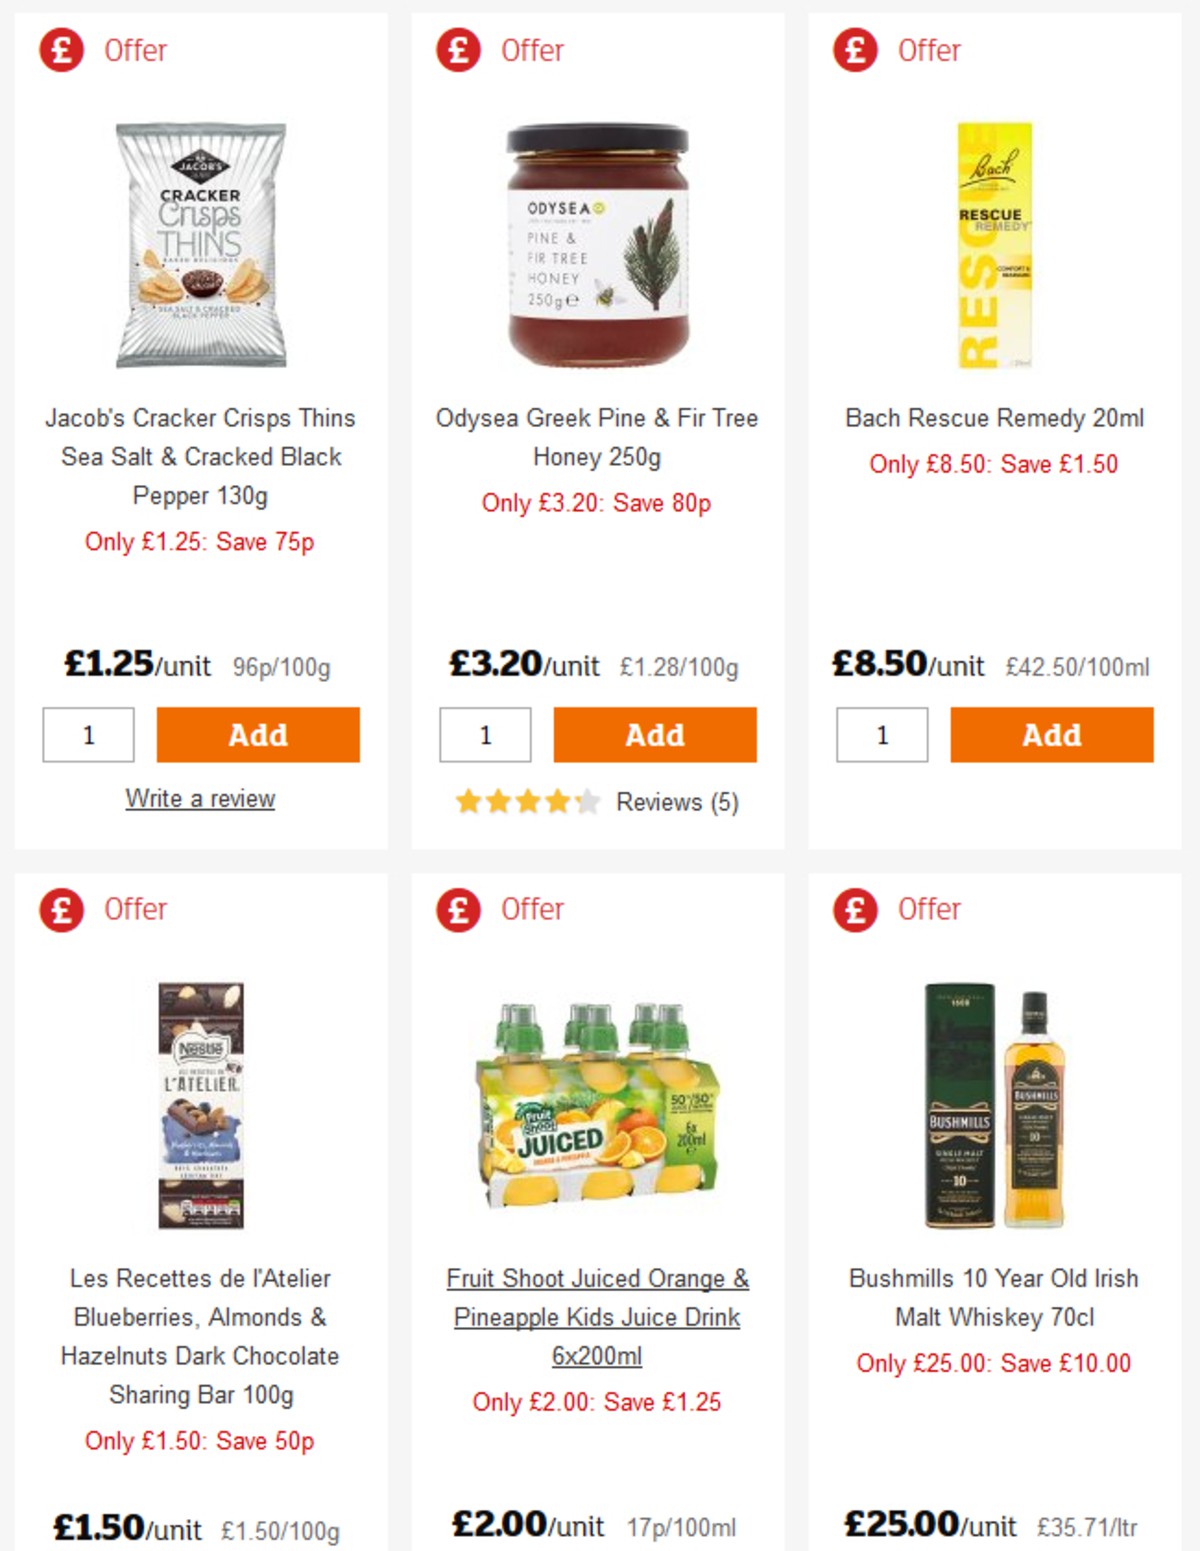 Sainsbury's Offers from 15 March